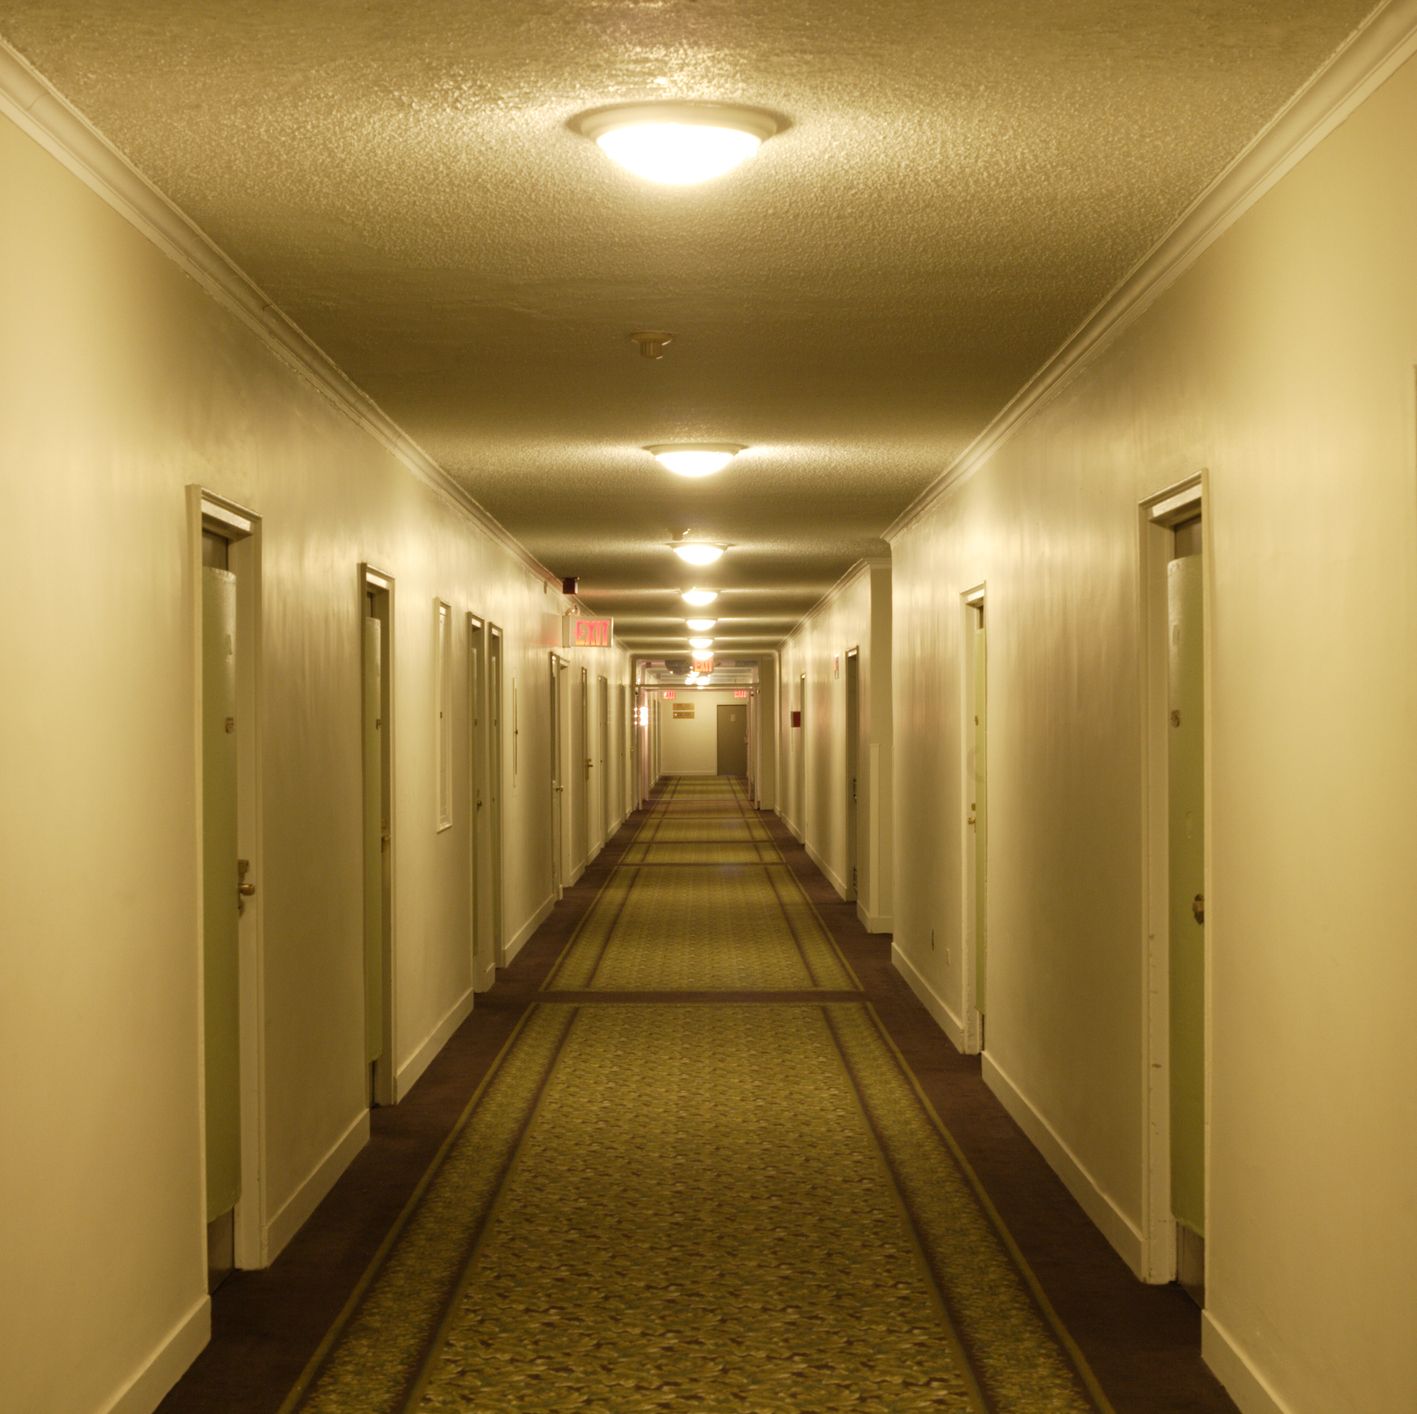 Why Empty 'Liminal Spaces' (Like Vacant Hotel Hallways) Freak You Out So Much